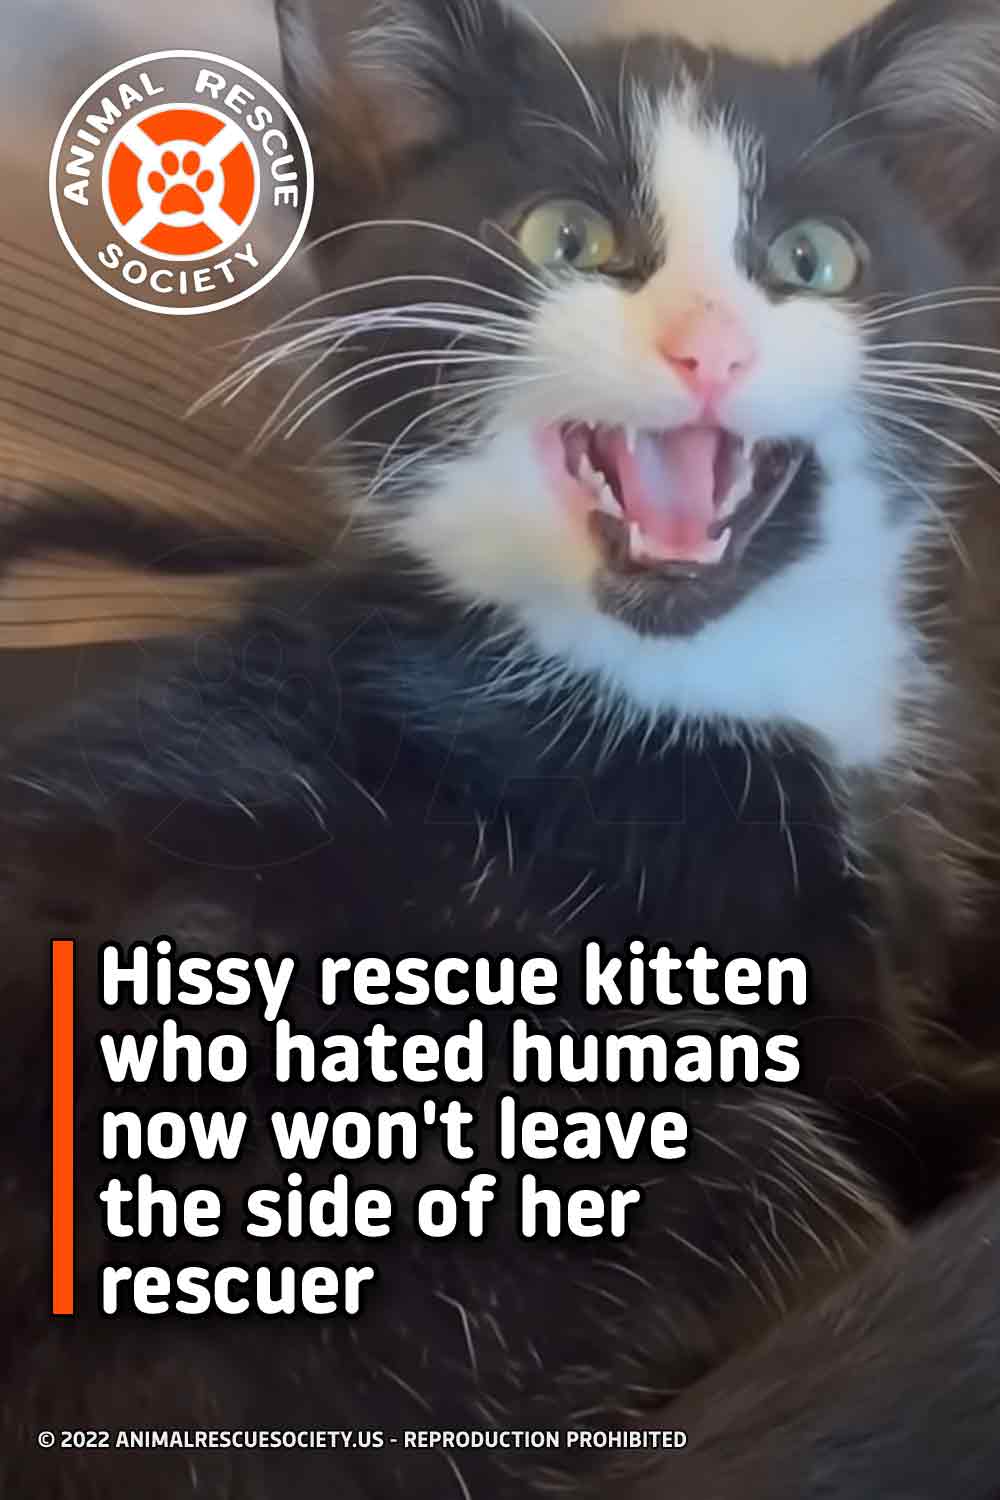 Hissy rescue kitten who hated humans now won\'t leave the side of her rescuer